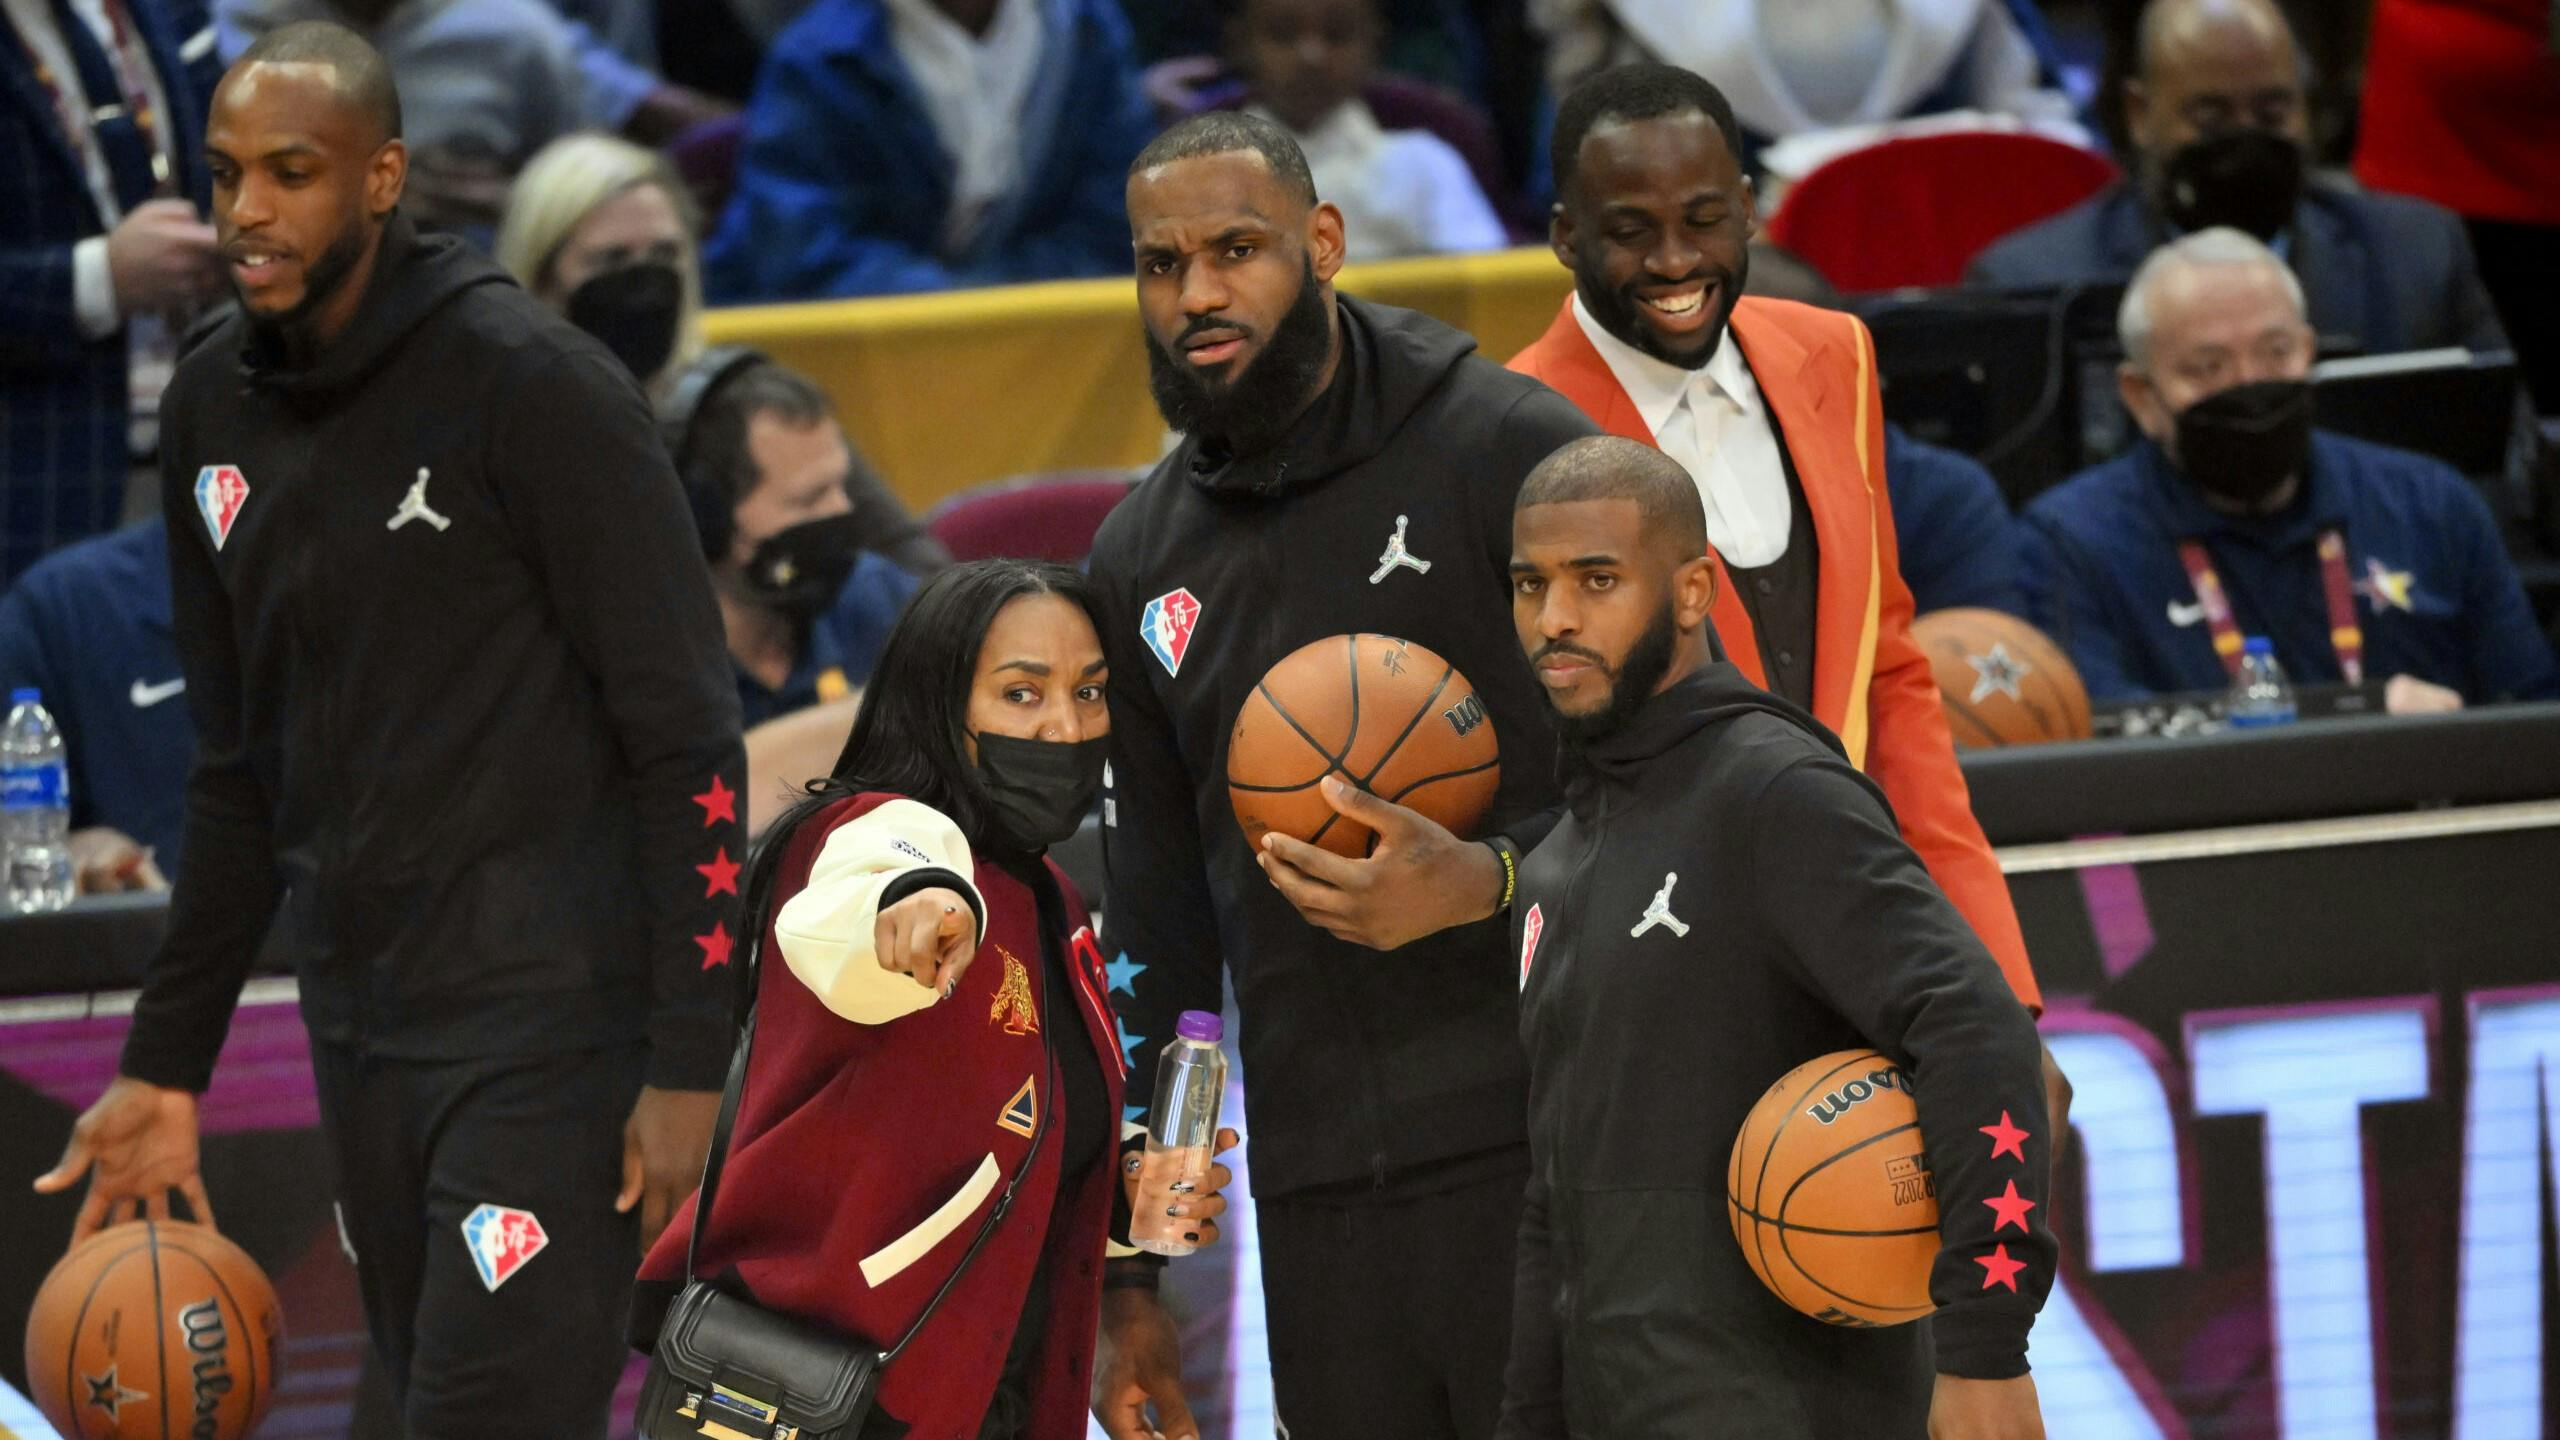 LeBron James, Chris Paul have extra motivation on opening night as NBA releases schedule, Christmas Day games